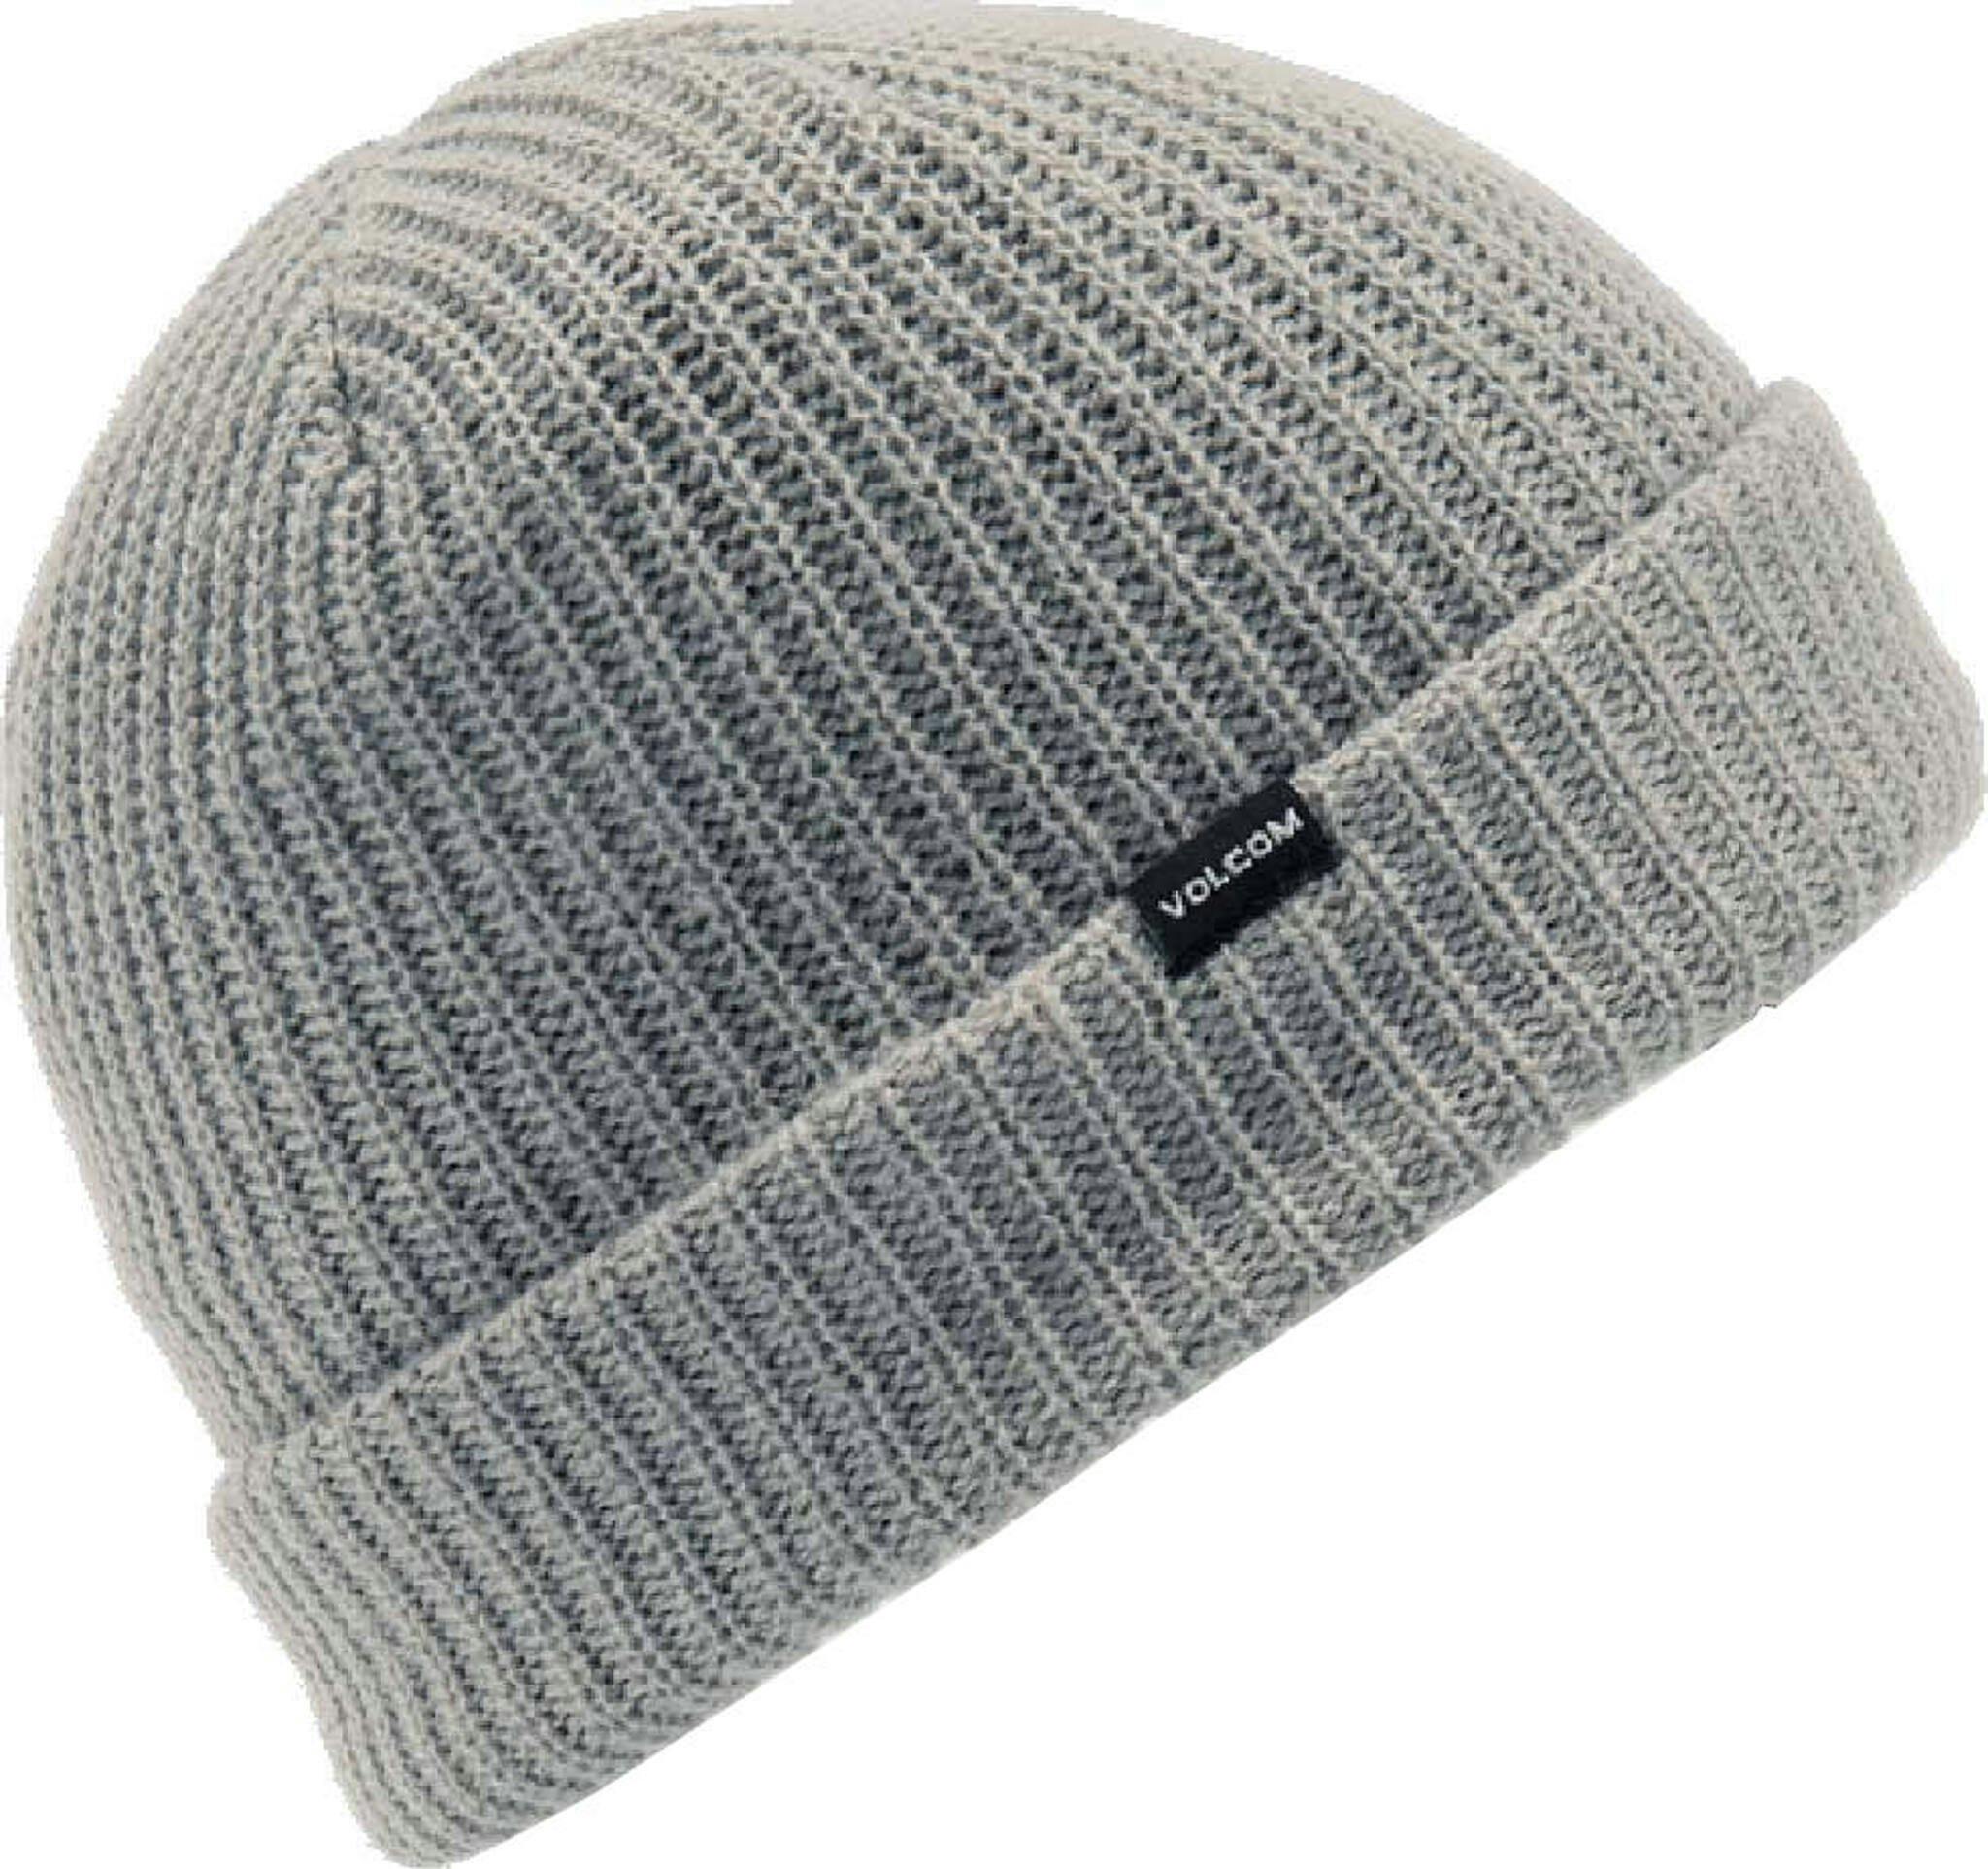 Product image for Sweep Lined Beanie - Kids